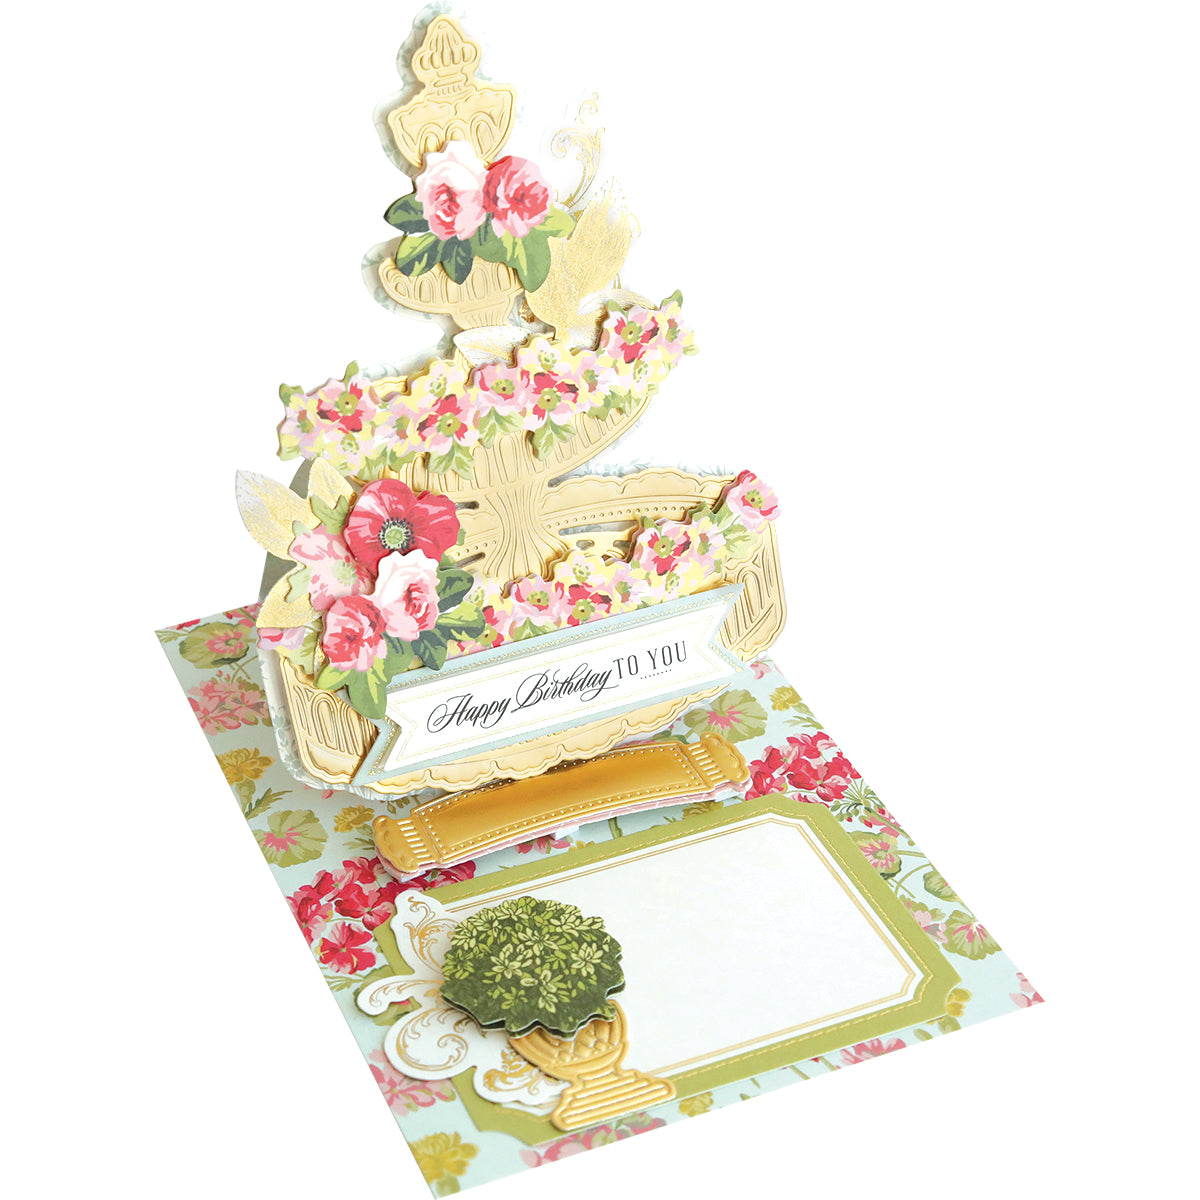 Crafted with creativity, the Anna Griffin Garden Fountain Easel Finishing School Kit adorned with a lively garden fountain and vibrant flowers will surely delight recipients. Perfect for surprising loved ones, this pop up card is like a mini craft box.